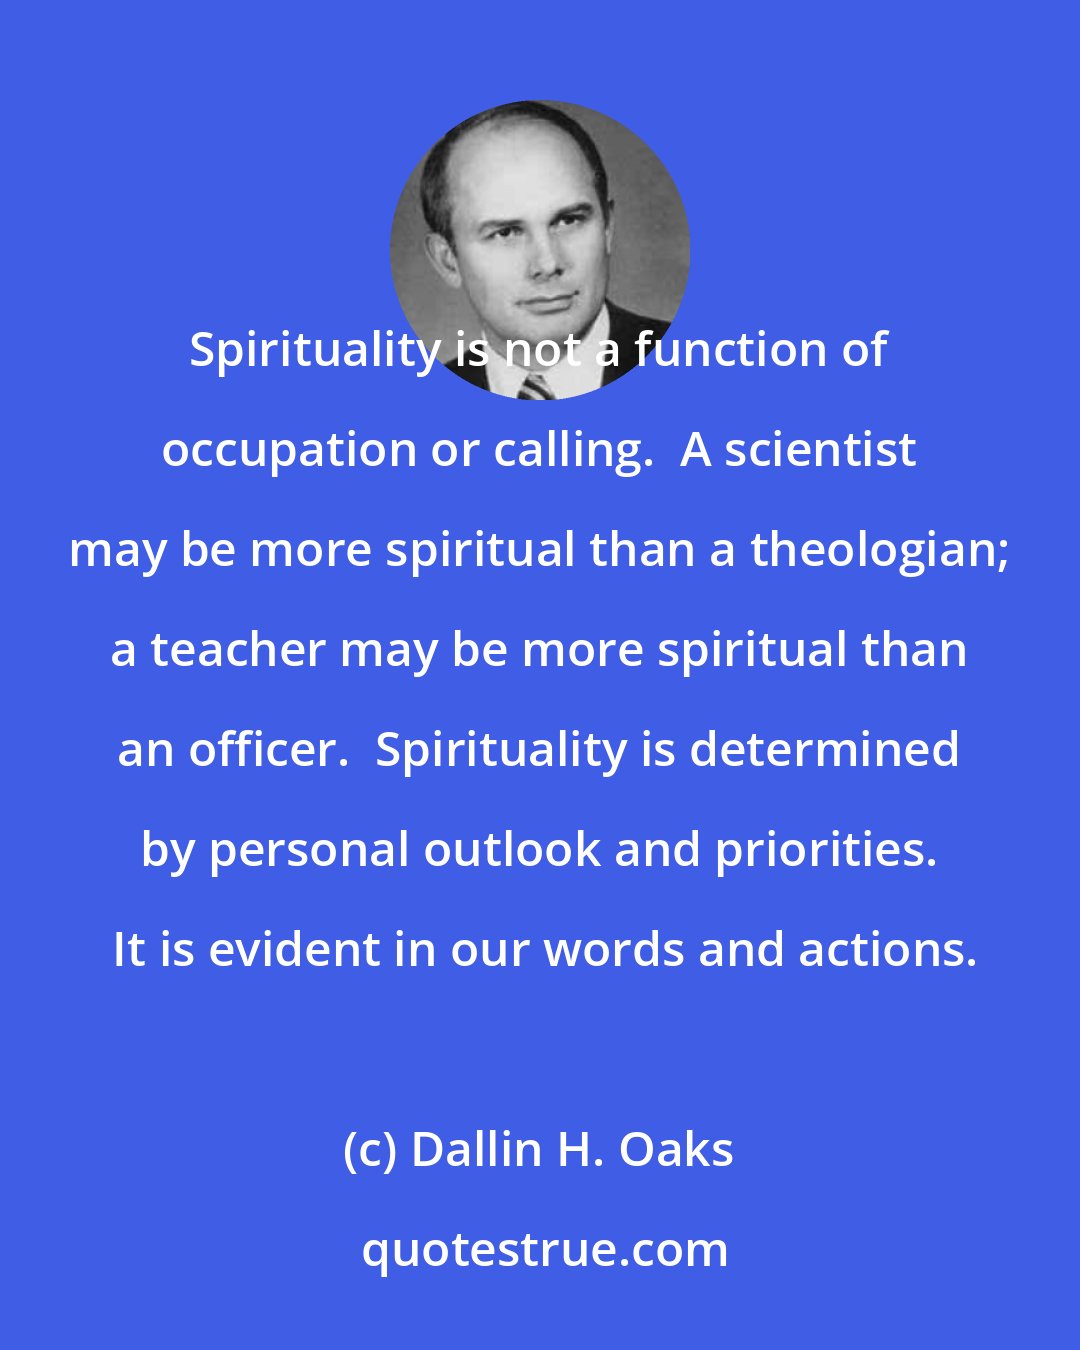 Dallin H. Oaks: Spirituality is not a function of occupation or calling.  A scientist may be more spiritual than a theologian; a teacher may be more spiritual than an officer.  Spirituality is determined by personal outlook and priorities.  It is evident in our words and actions.